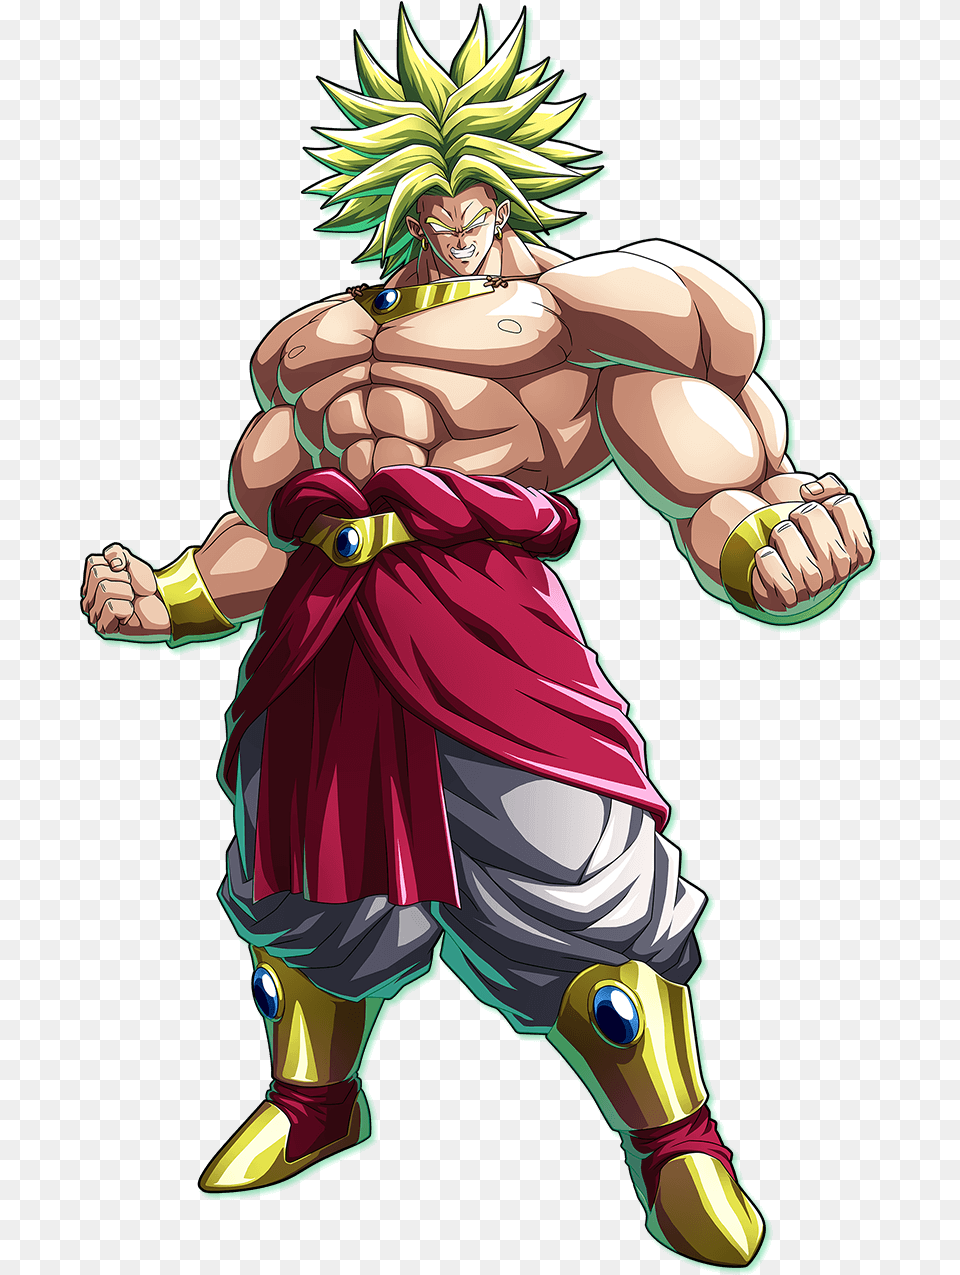 Broly Dbzf Dragon Ball Fighterz Know Your Meme Dragon Ball Fighterz Broly, Publication, Book, Comics, Baby Free Png Download